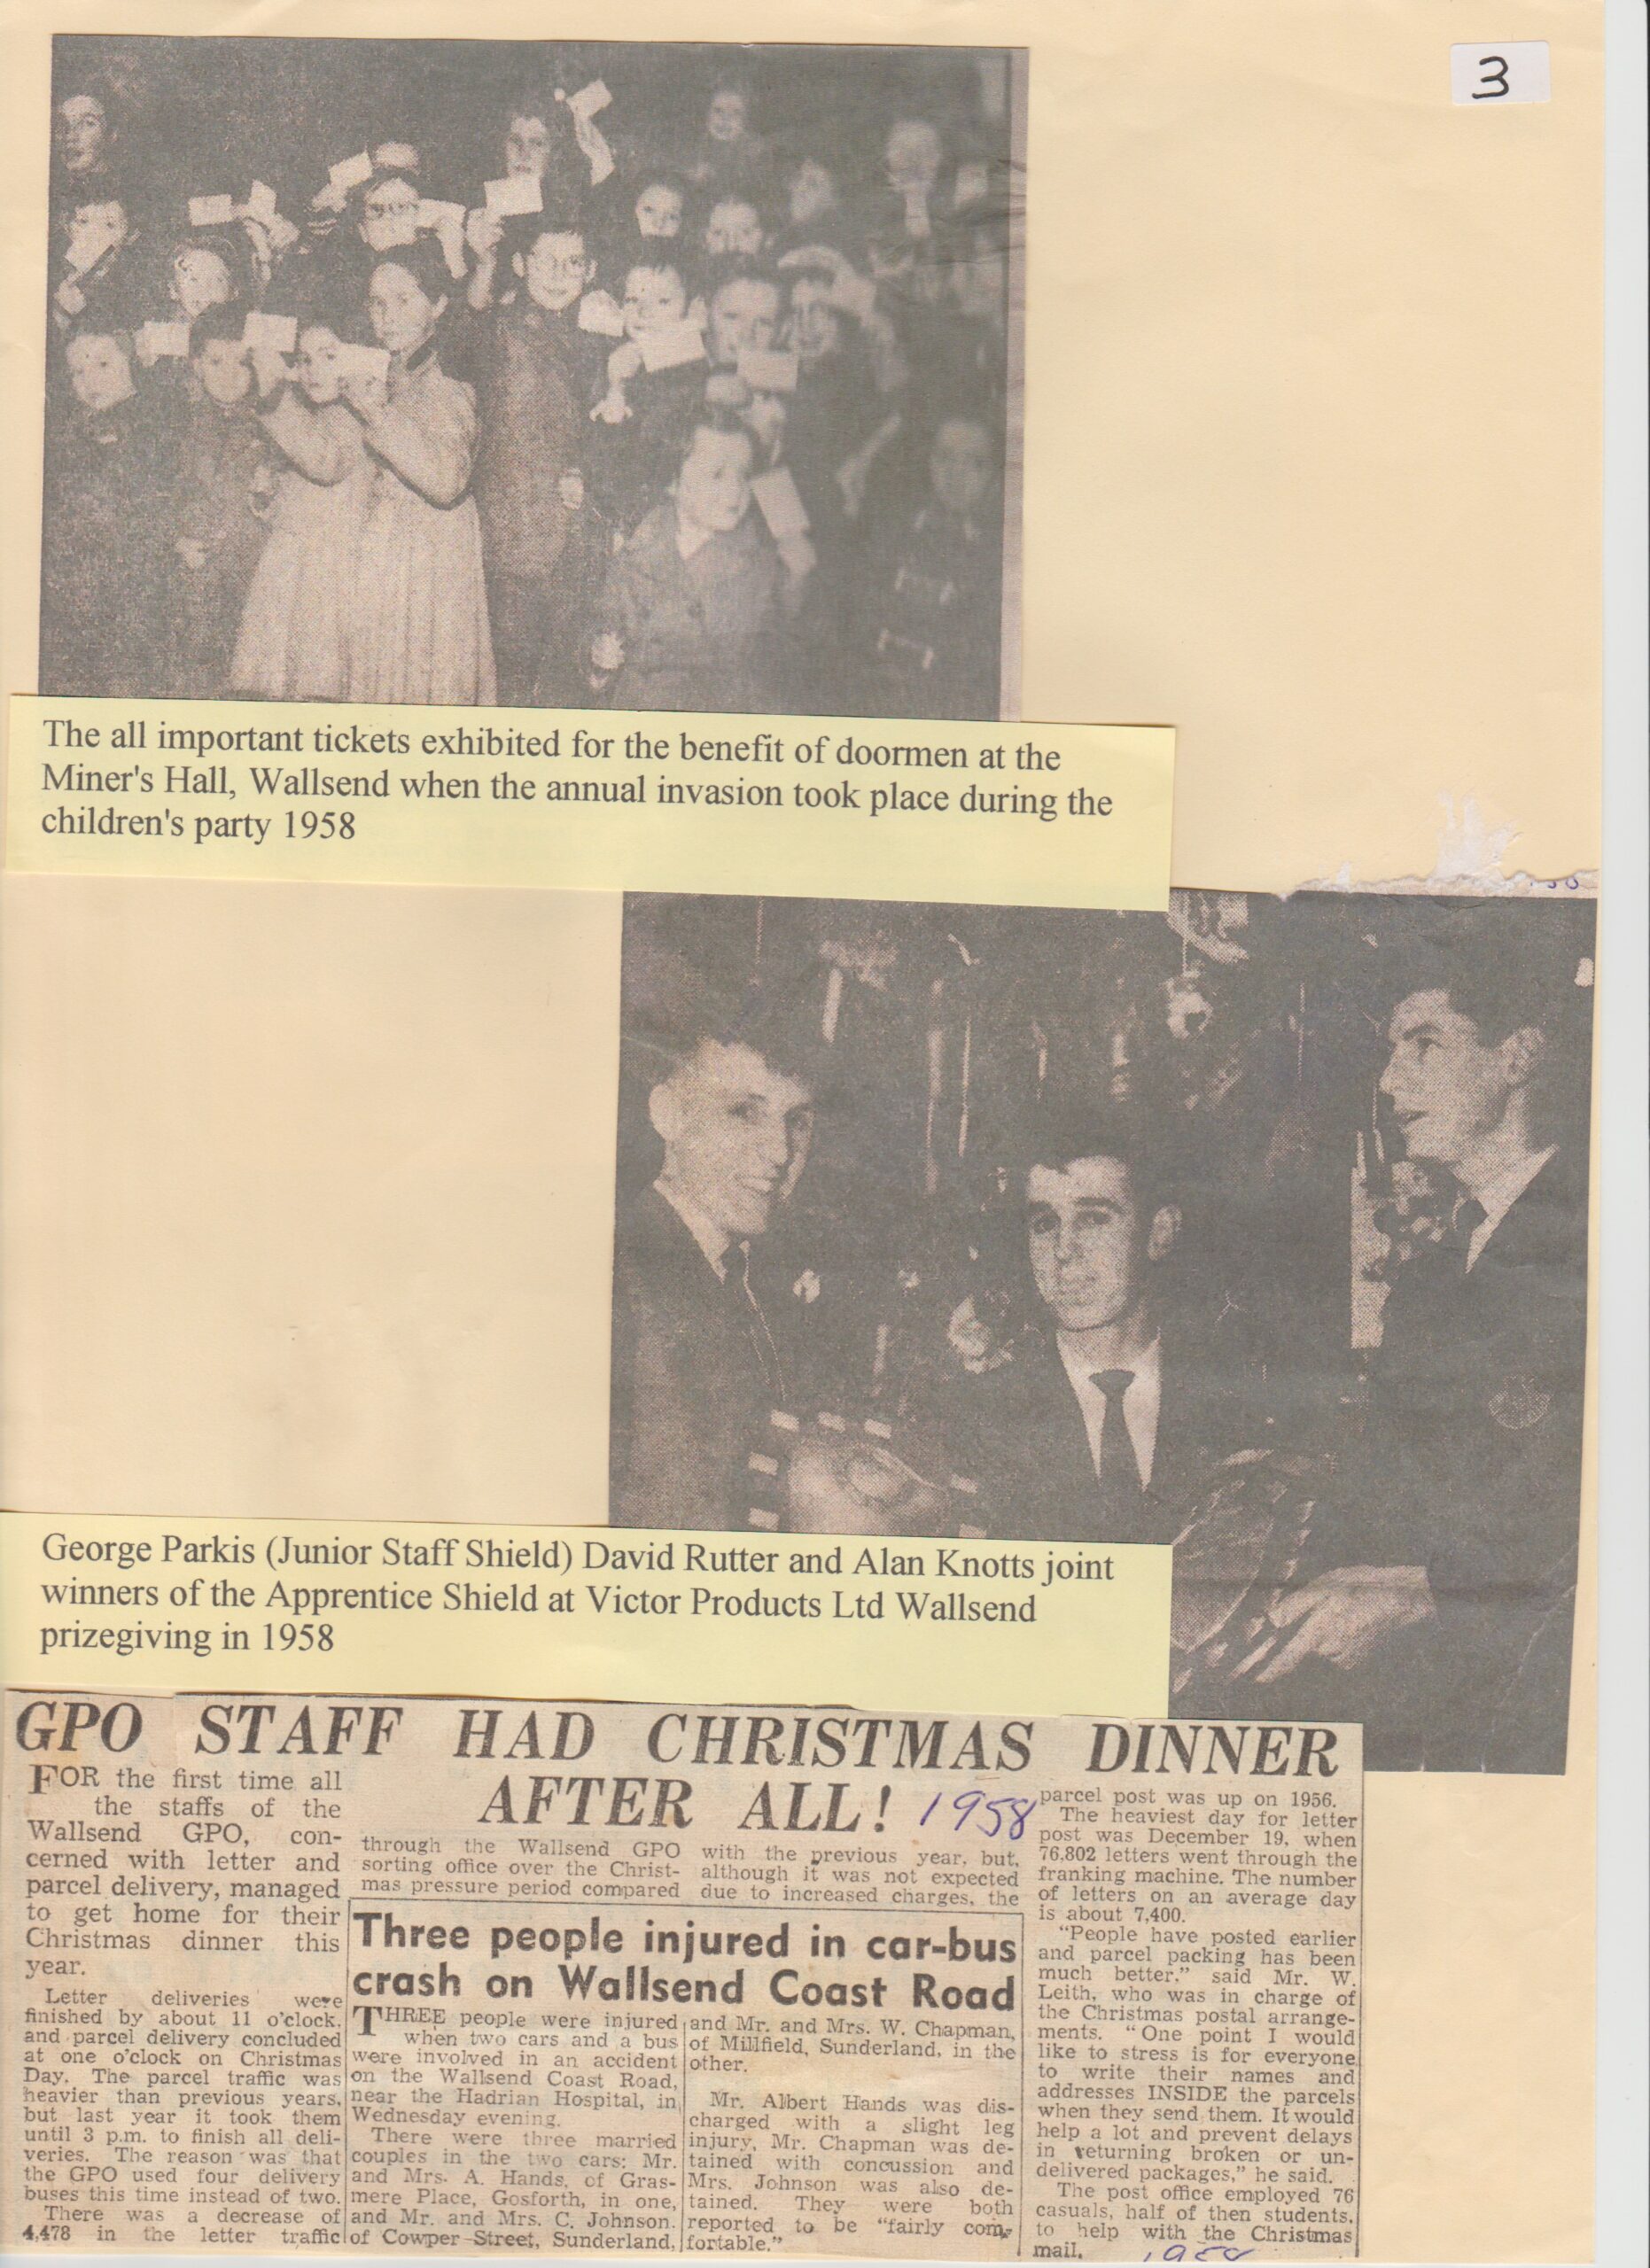 1958 Childrens Party at Miners Hall _ Victor Products Apperntice Adwards with George Parkis,David Rutter, Alan Knotts _ GPO Christmas Staff Party